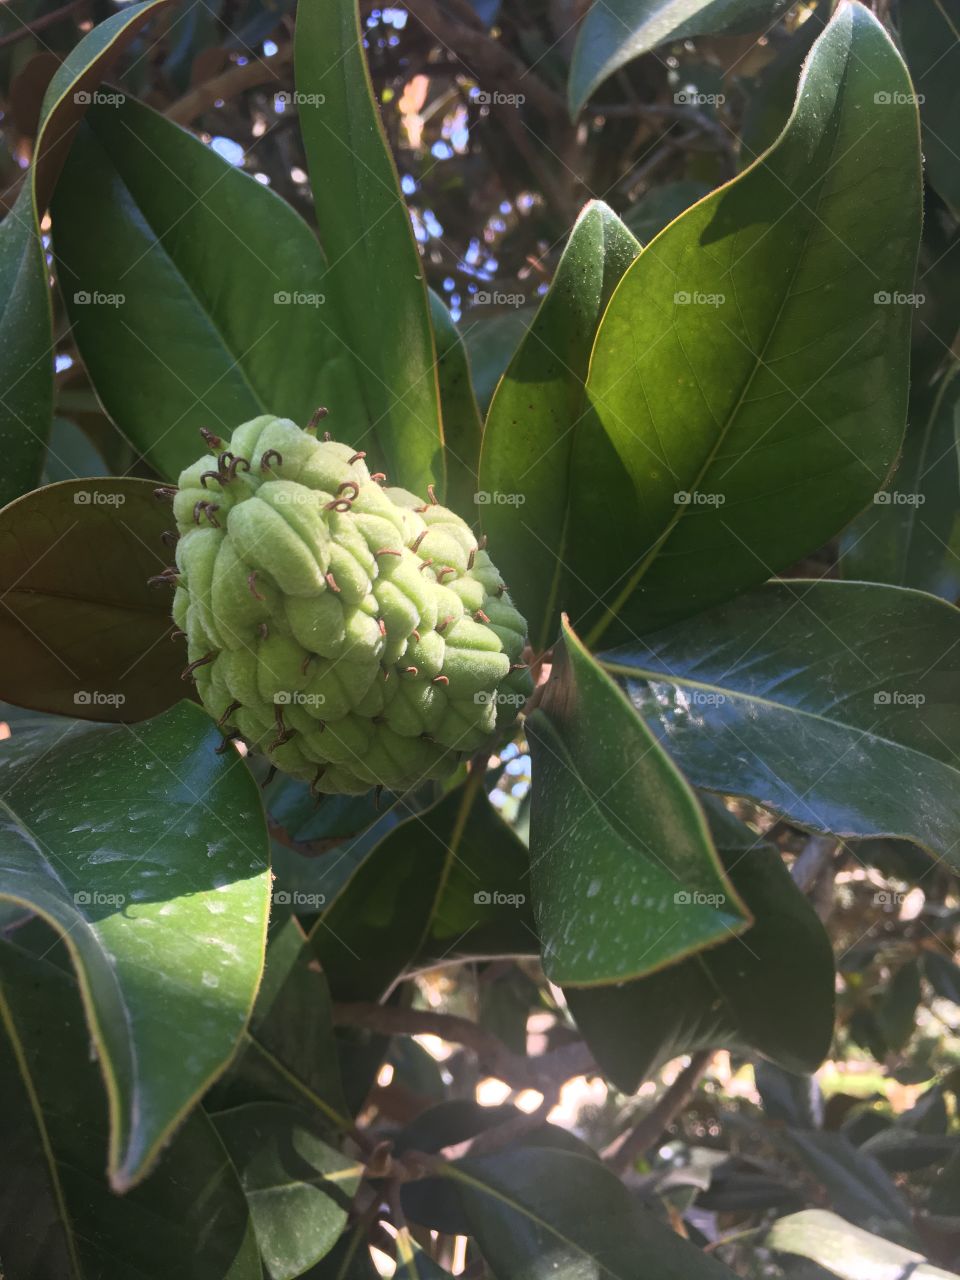 The fig trees in the garden are starting to bloom. Soon we will have delicious figs to eat once they are ready. 